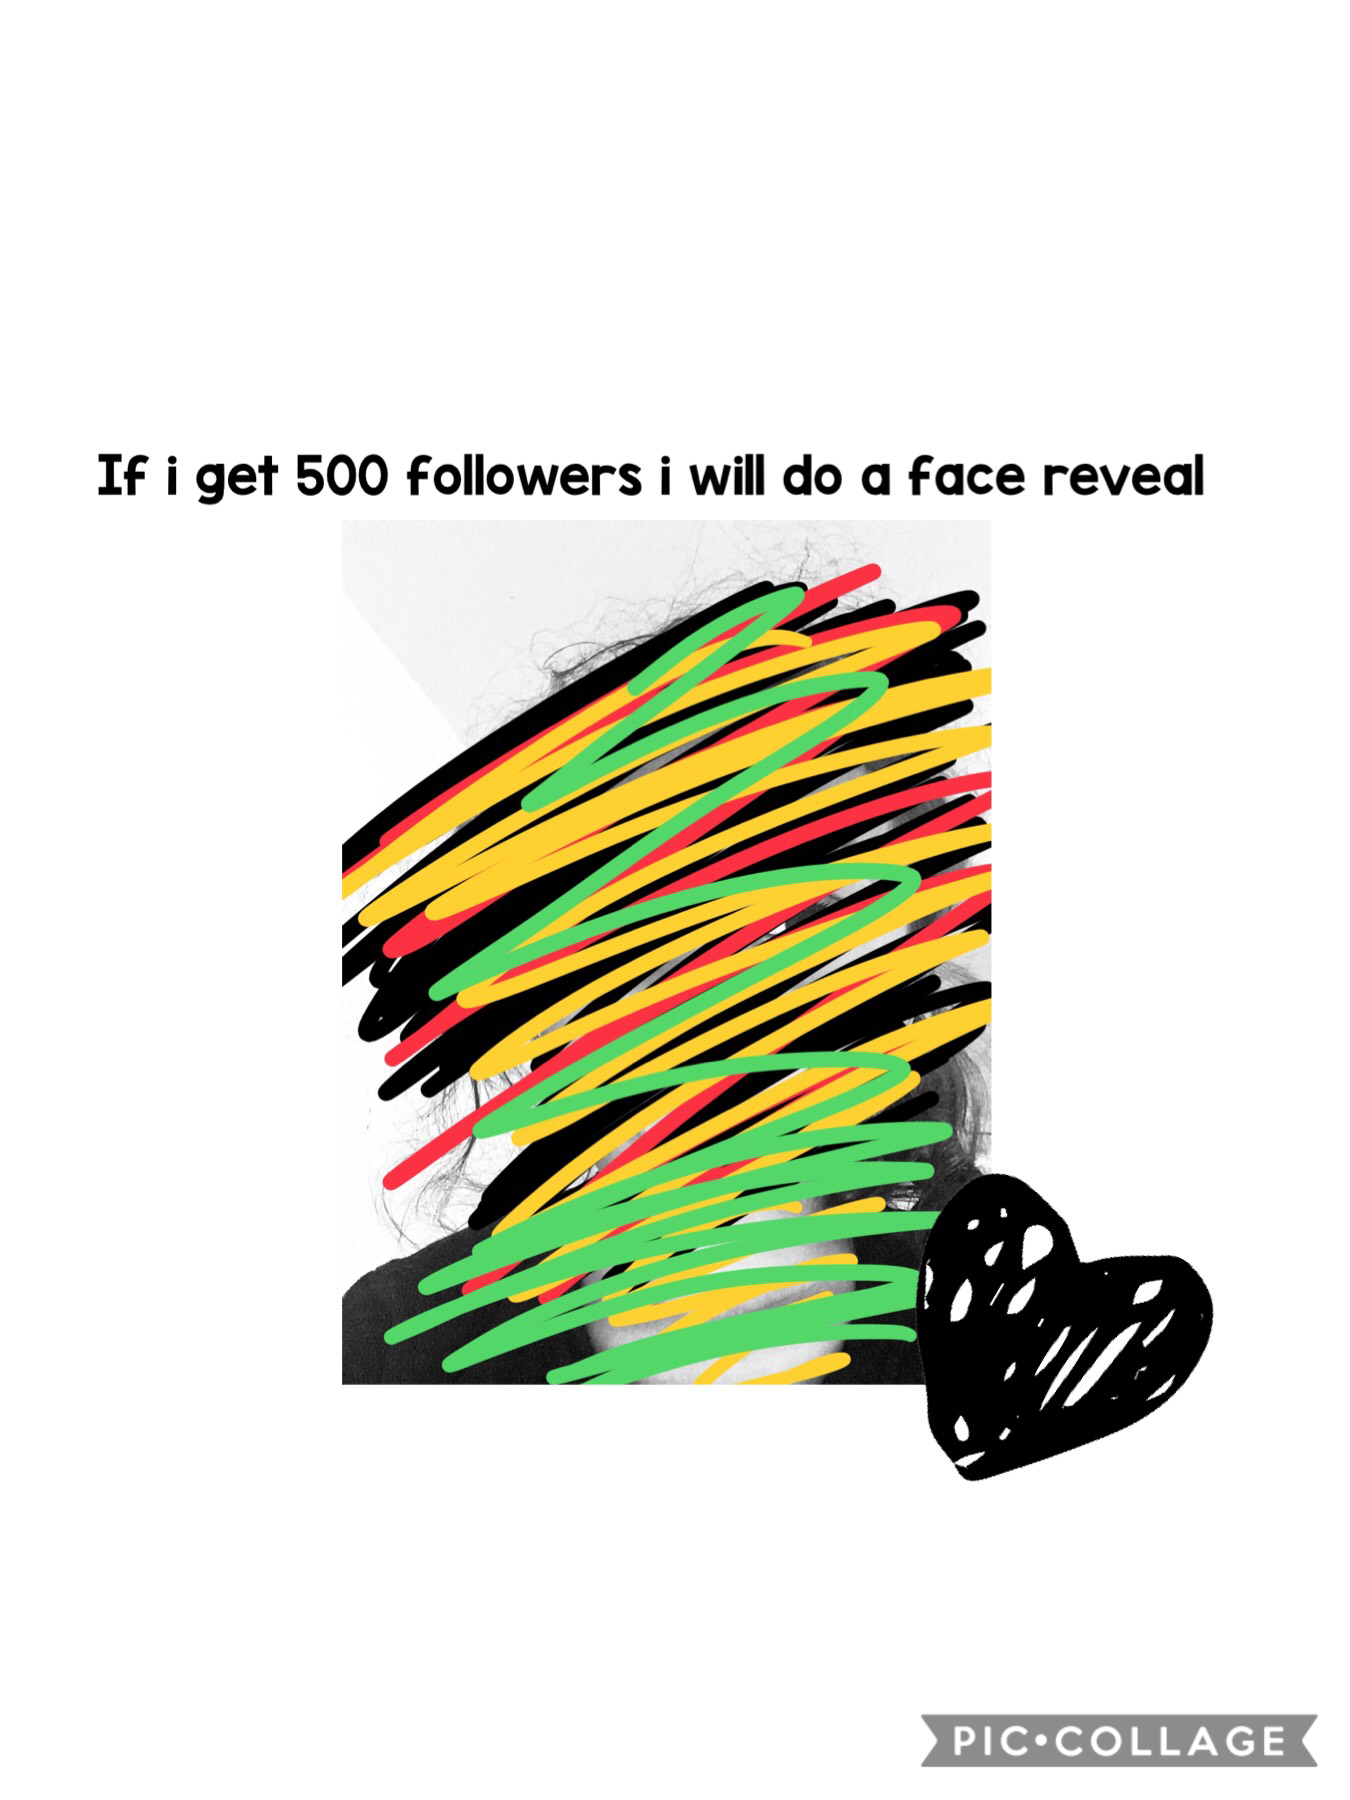 Face reveal only at 500 followers!!?!?